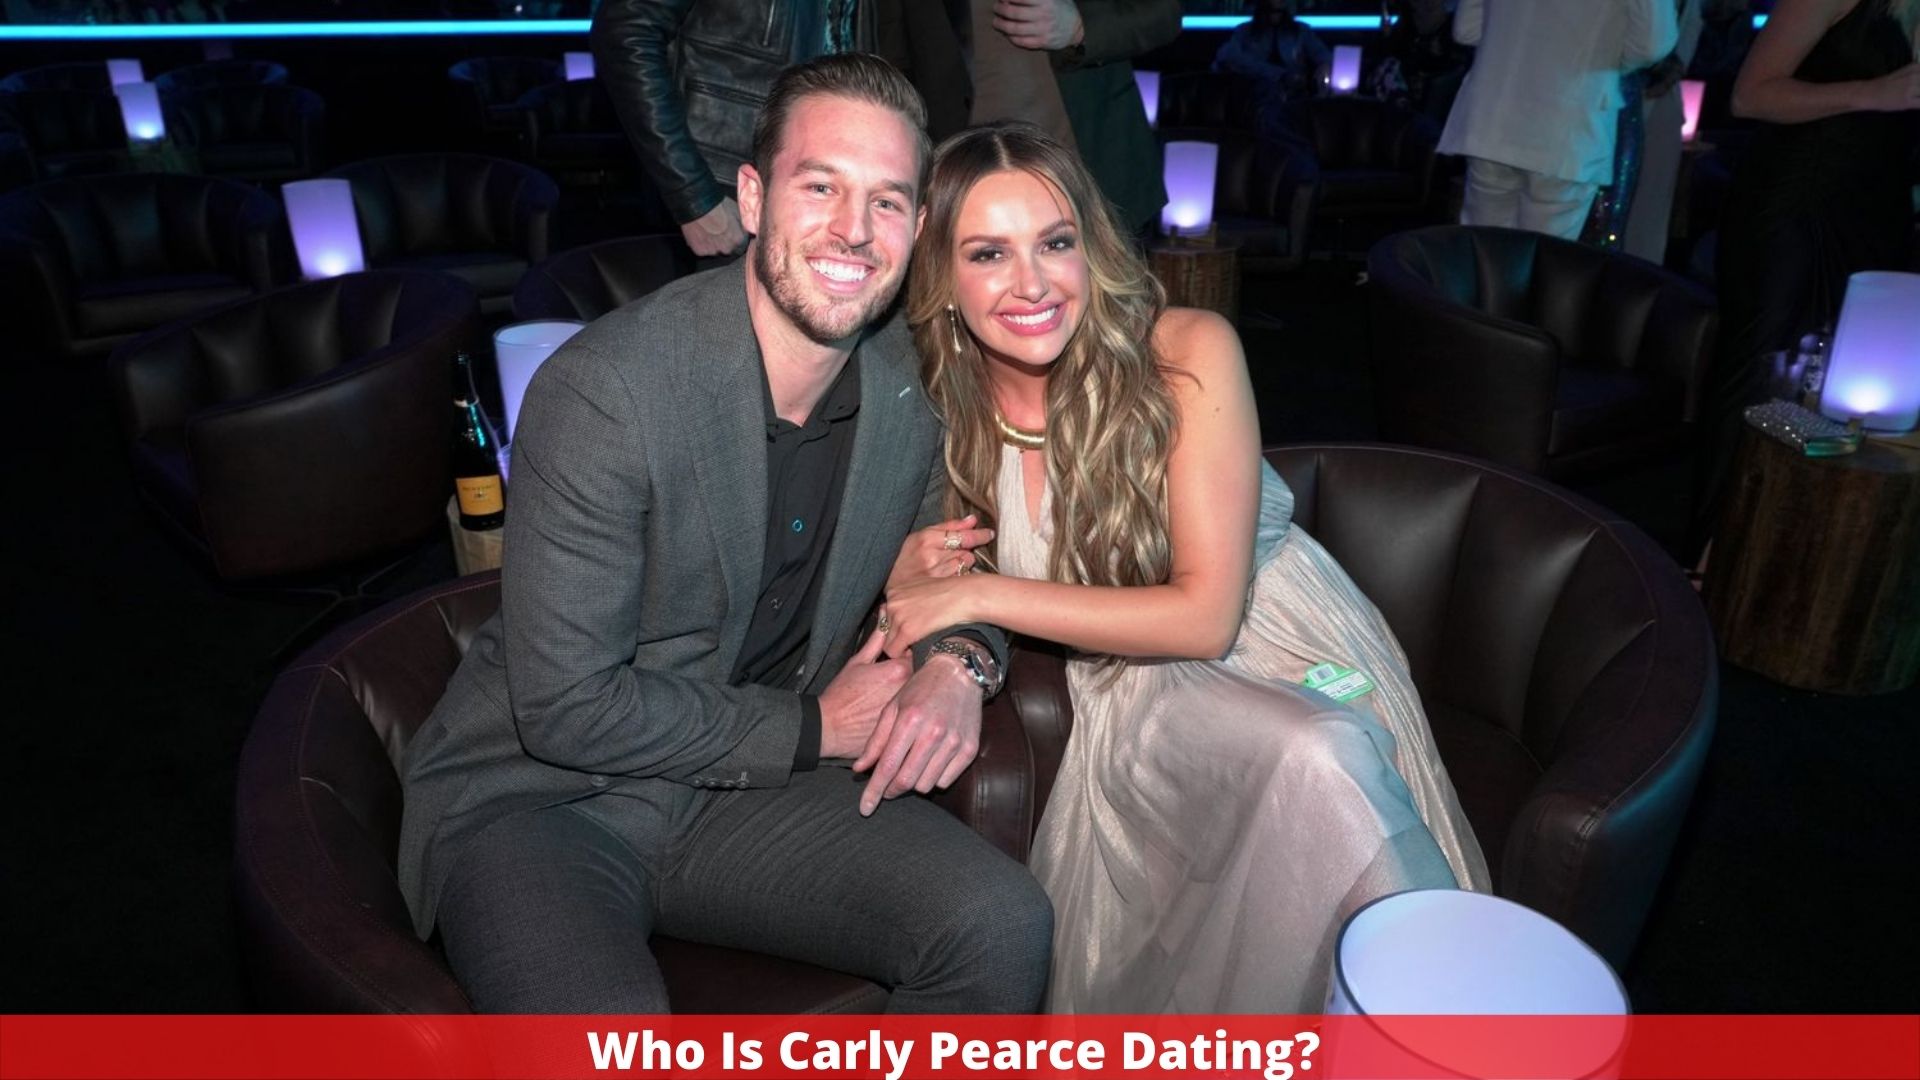 Who Is Carly Pearce Dating?